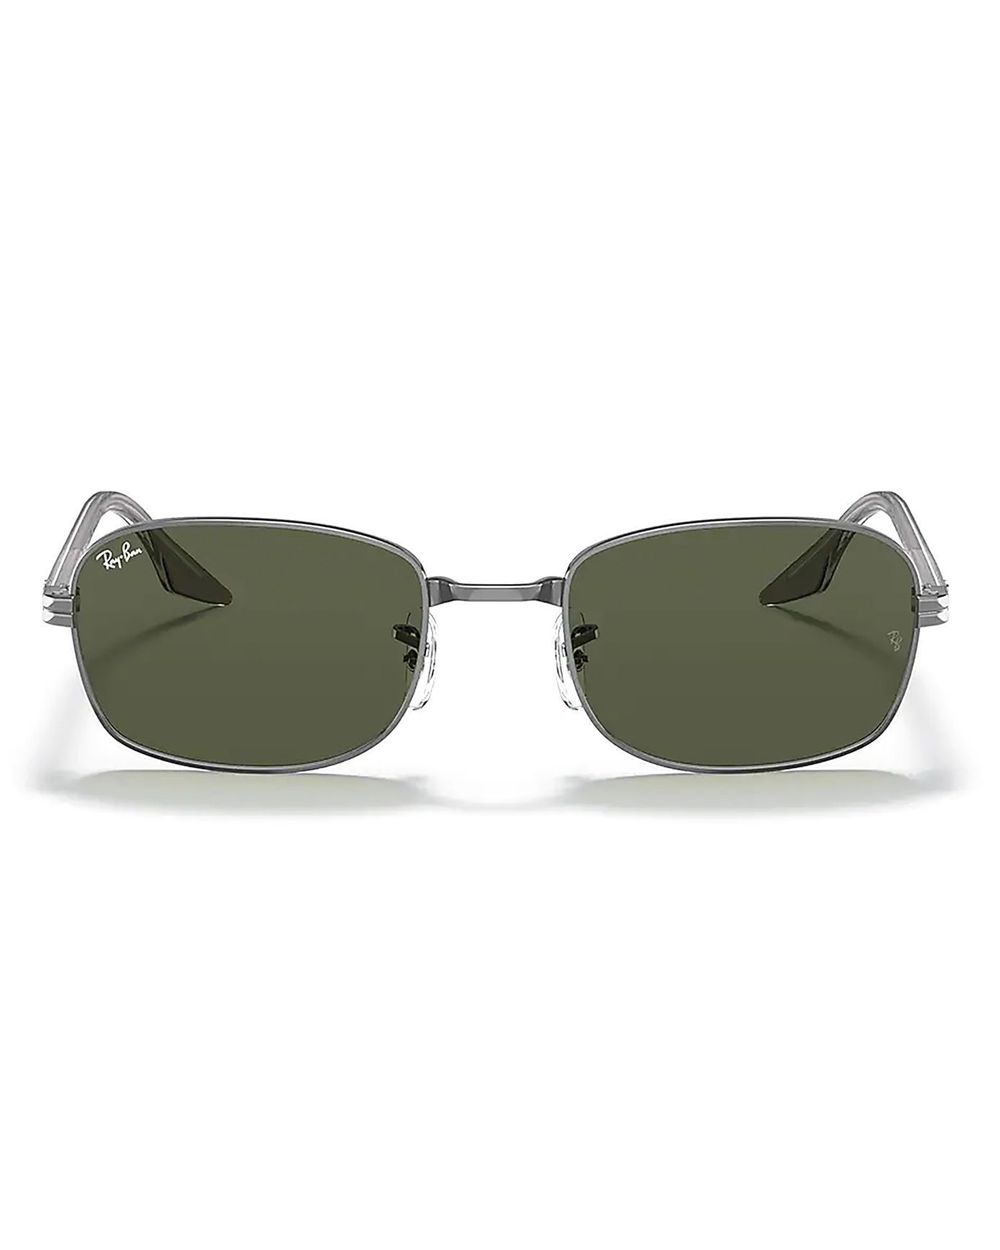 Ray-Ban Unisex Green Rectangle Sunglasses RB3690 004/31 54-21 | Buy Ray ...